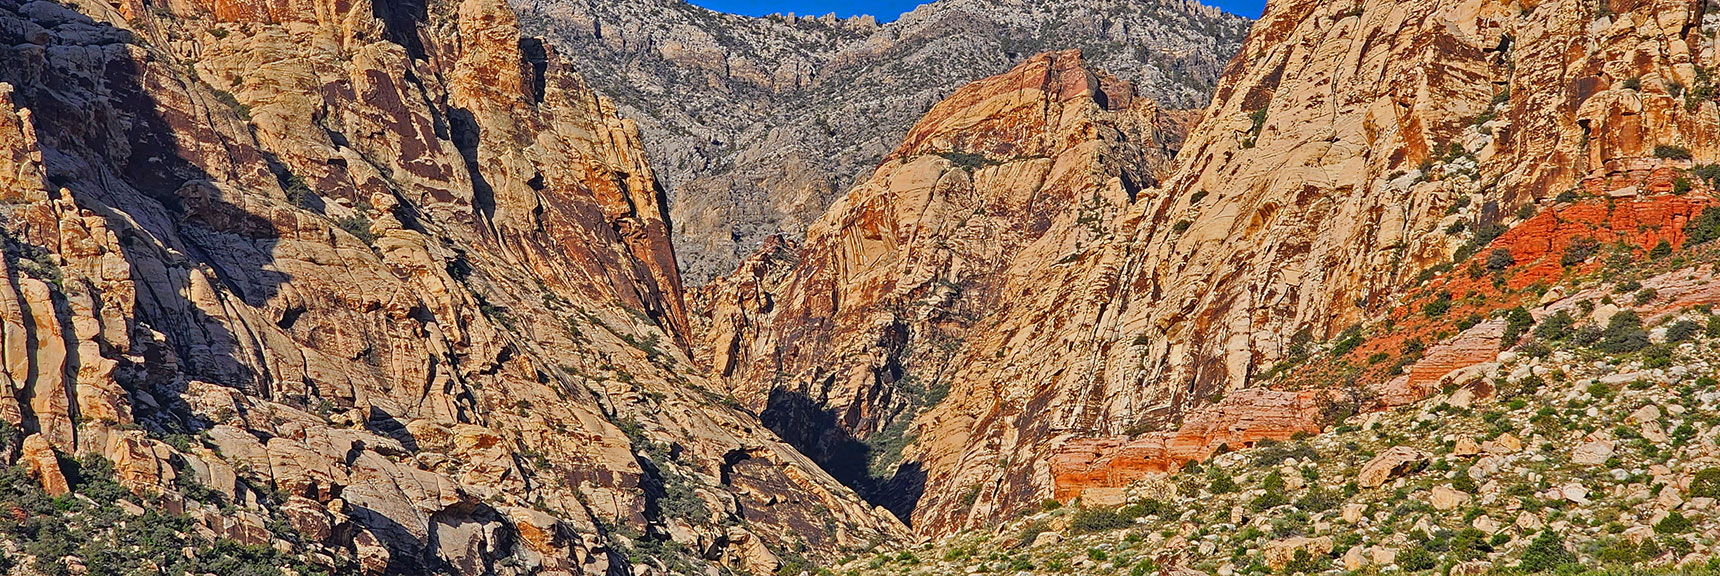 View Up Oak Creek Canyon Between Mt. Wilson and Rainbow Mt. | Knoll Trail | Red Rock Canyon National Conservation Area, Nevada | David Smith | LasVegasAreaTrails.com